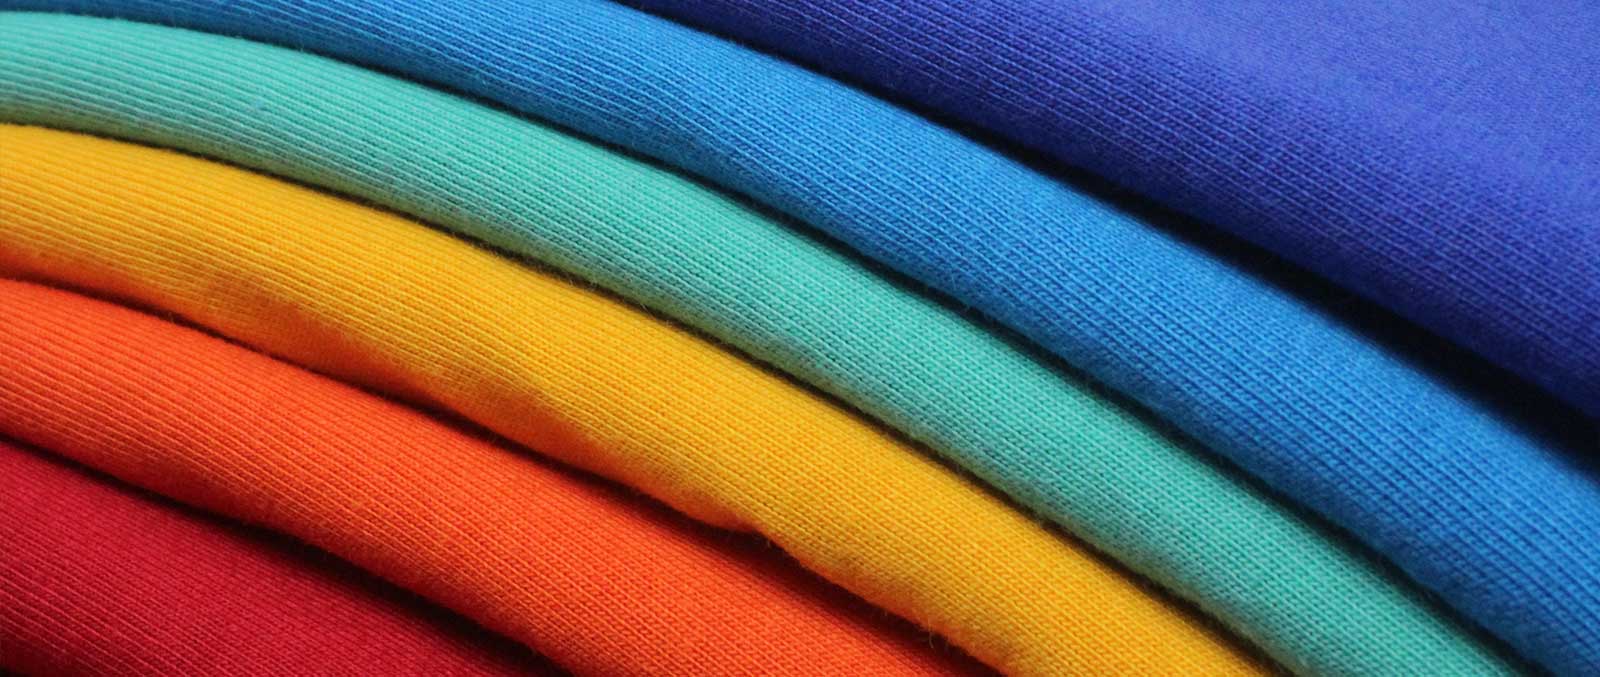 polyester in different colors